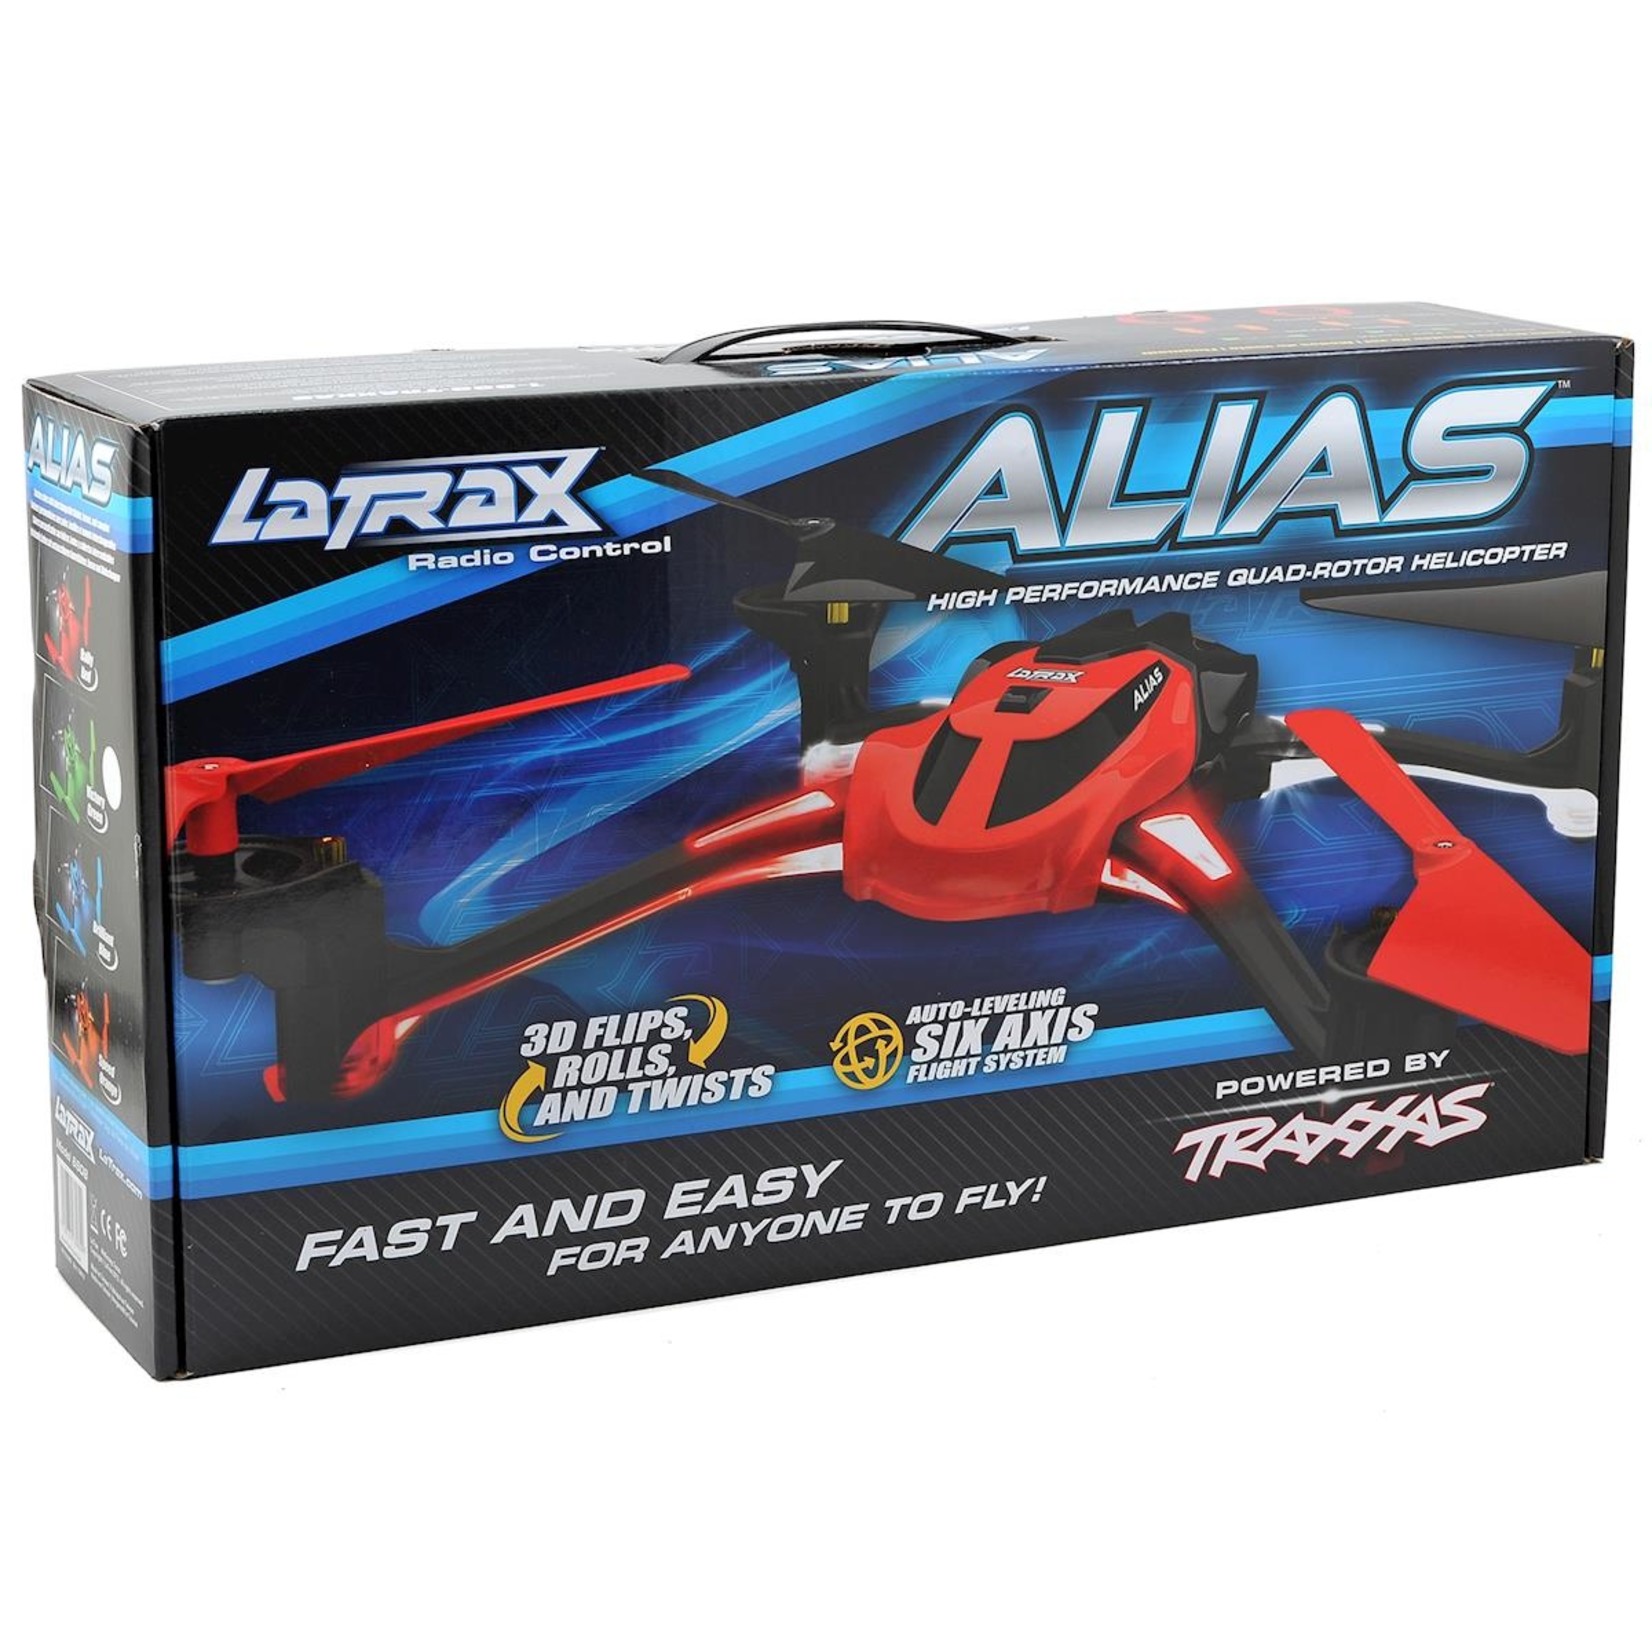 Traxxas Traxxas LaTrax Alias Ready-To-Fly Micro Electric Quadcopter Drone (Red) #6608-RED